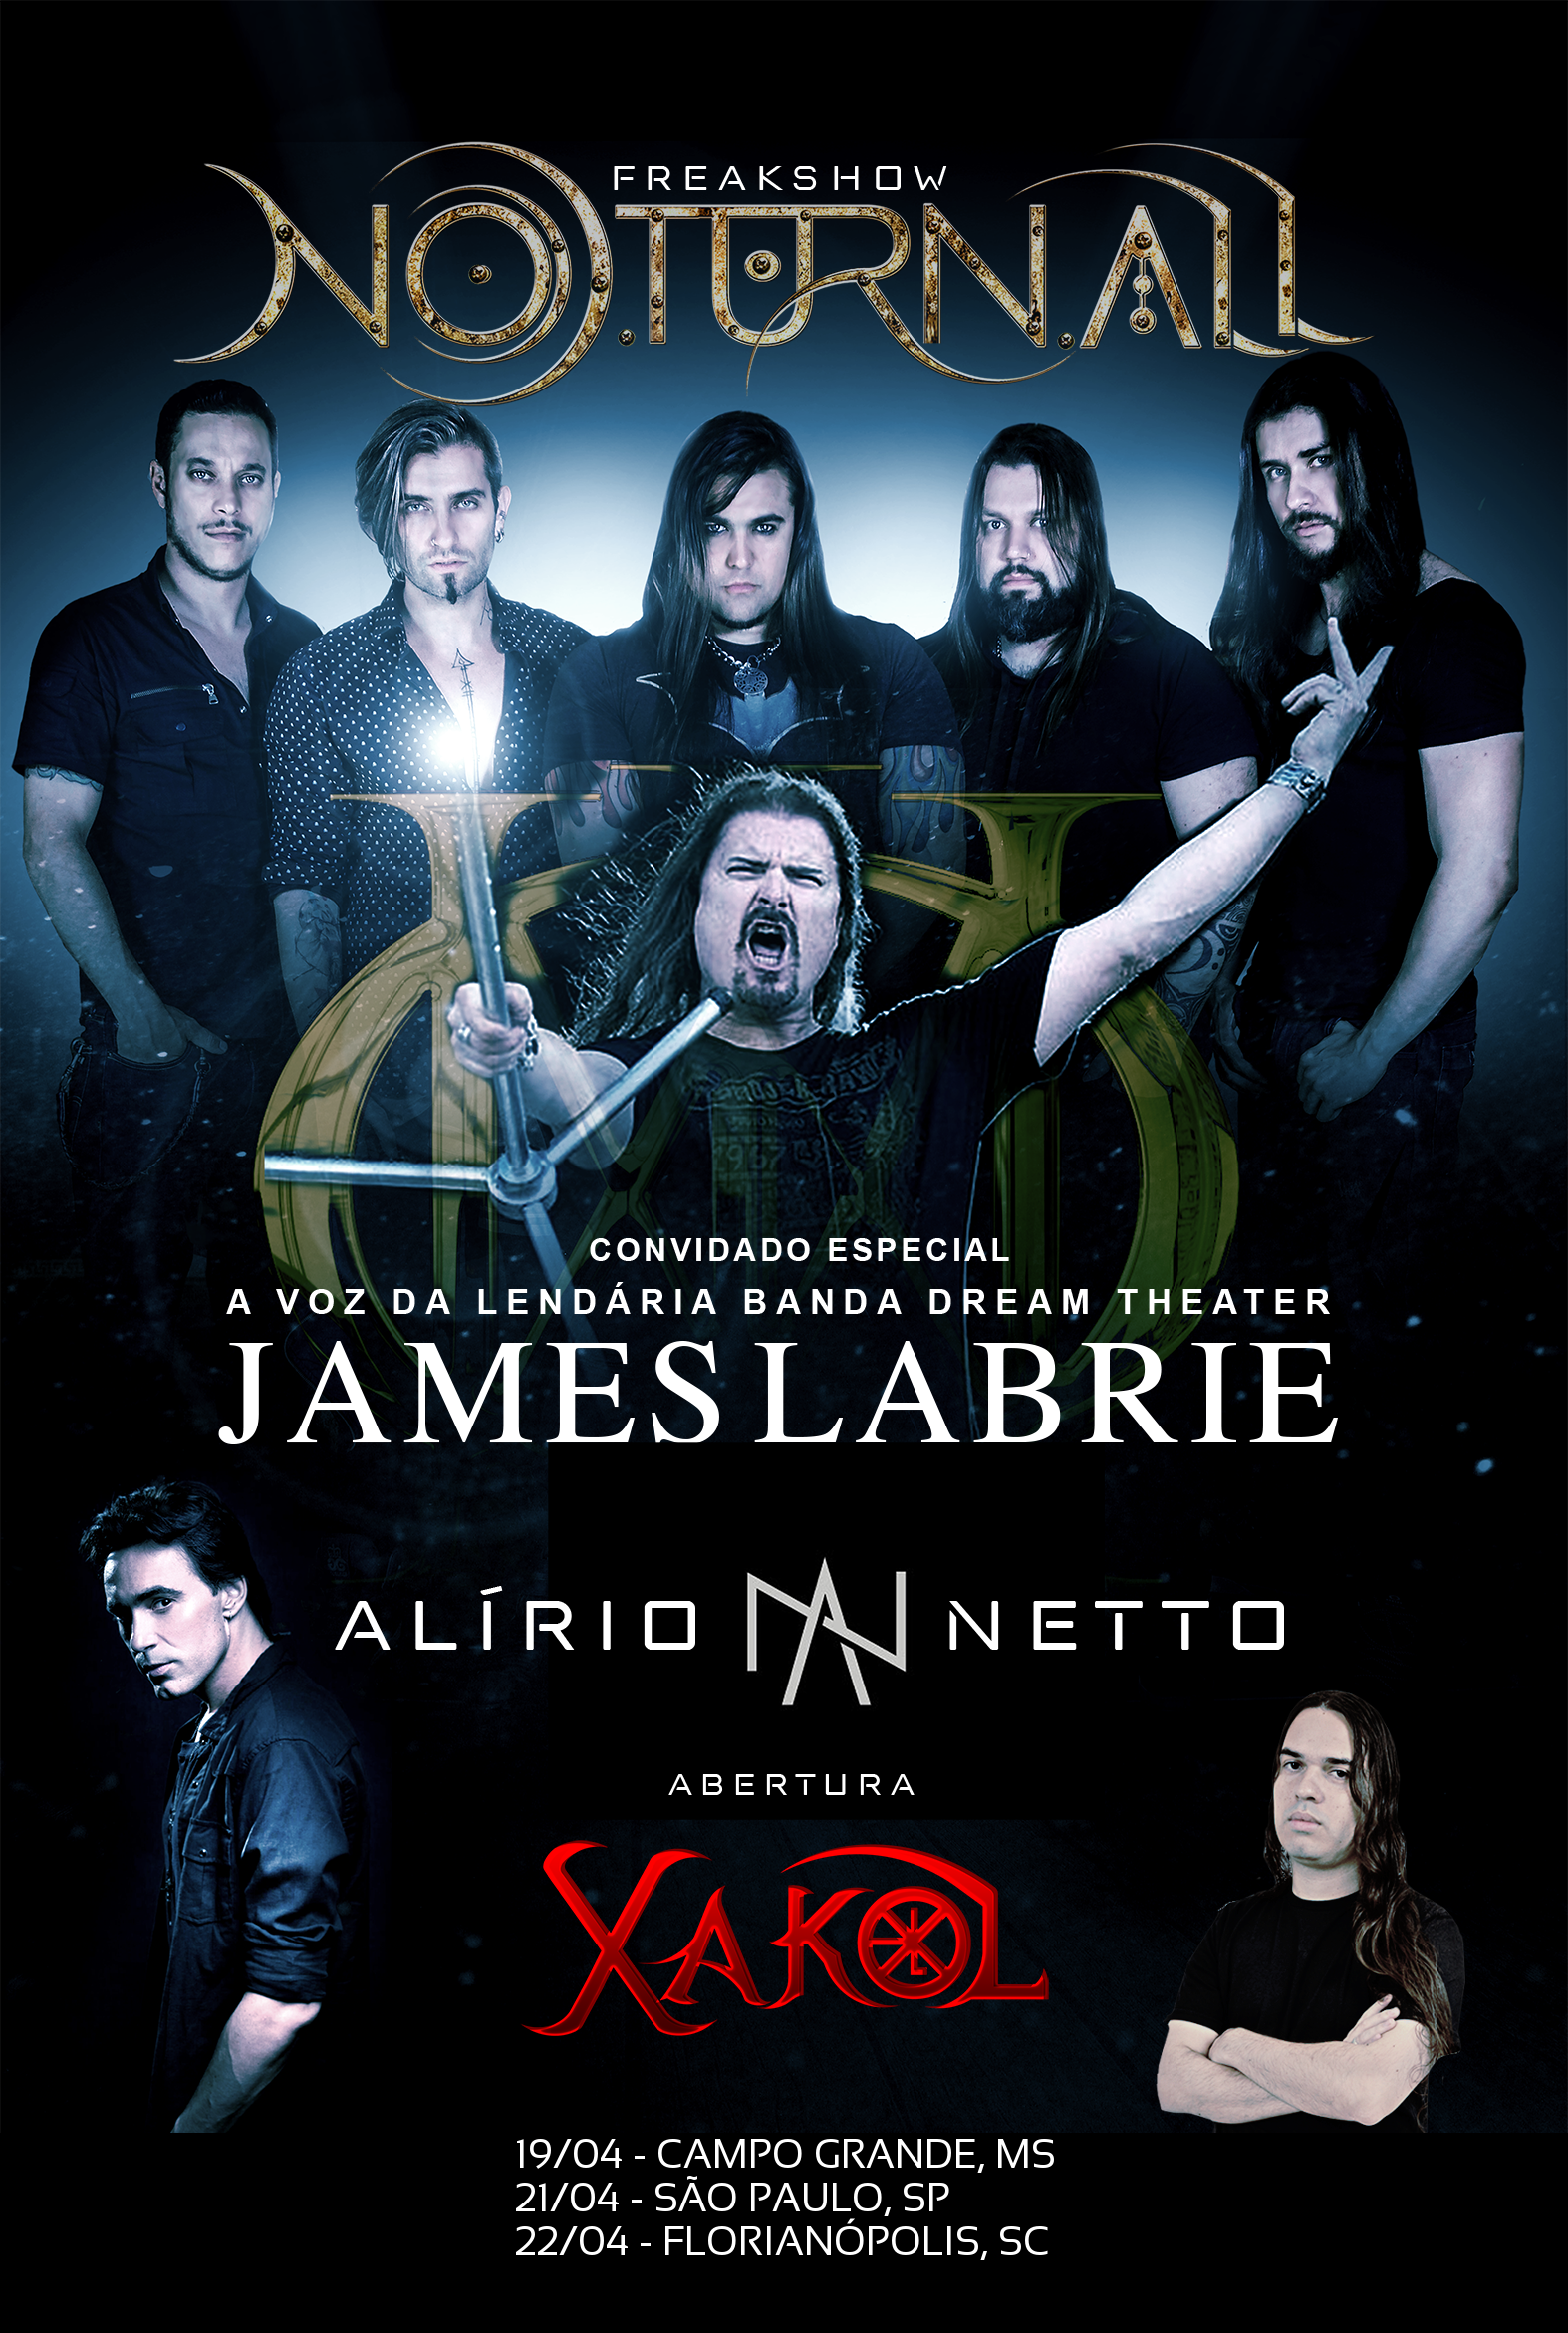 Tour supporting James LaBrie and Noturnall